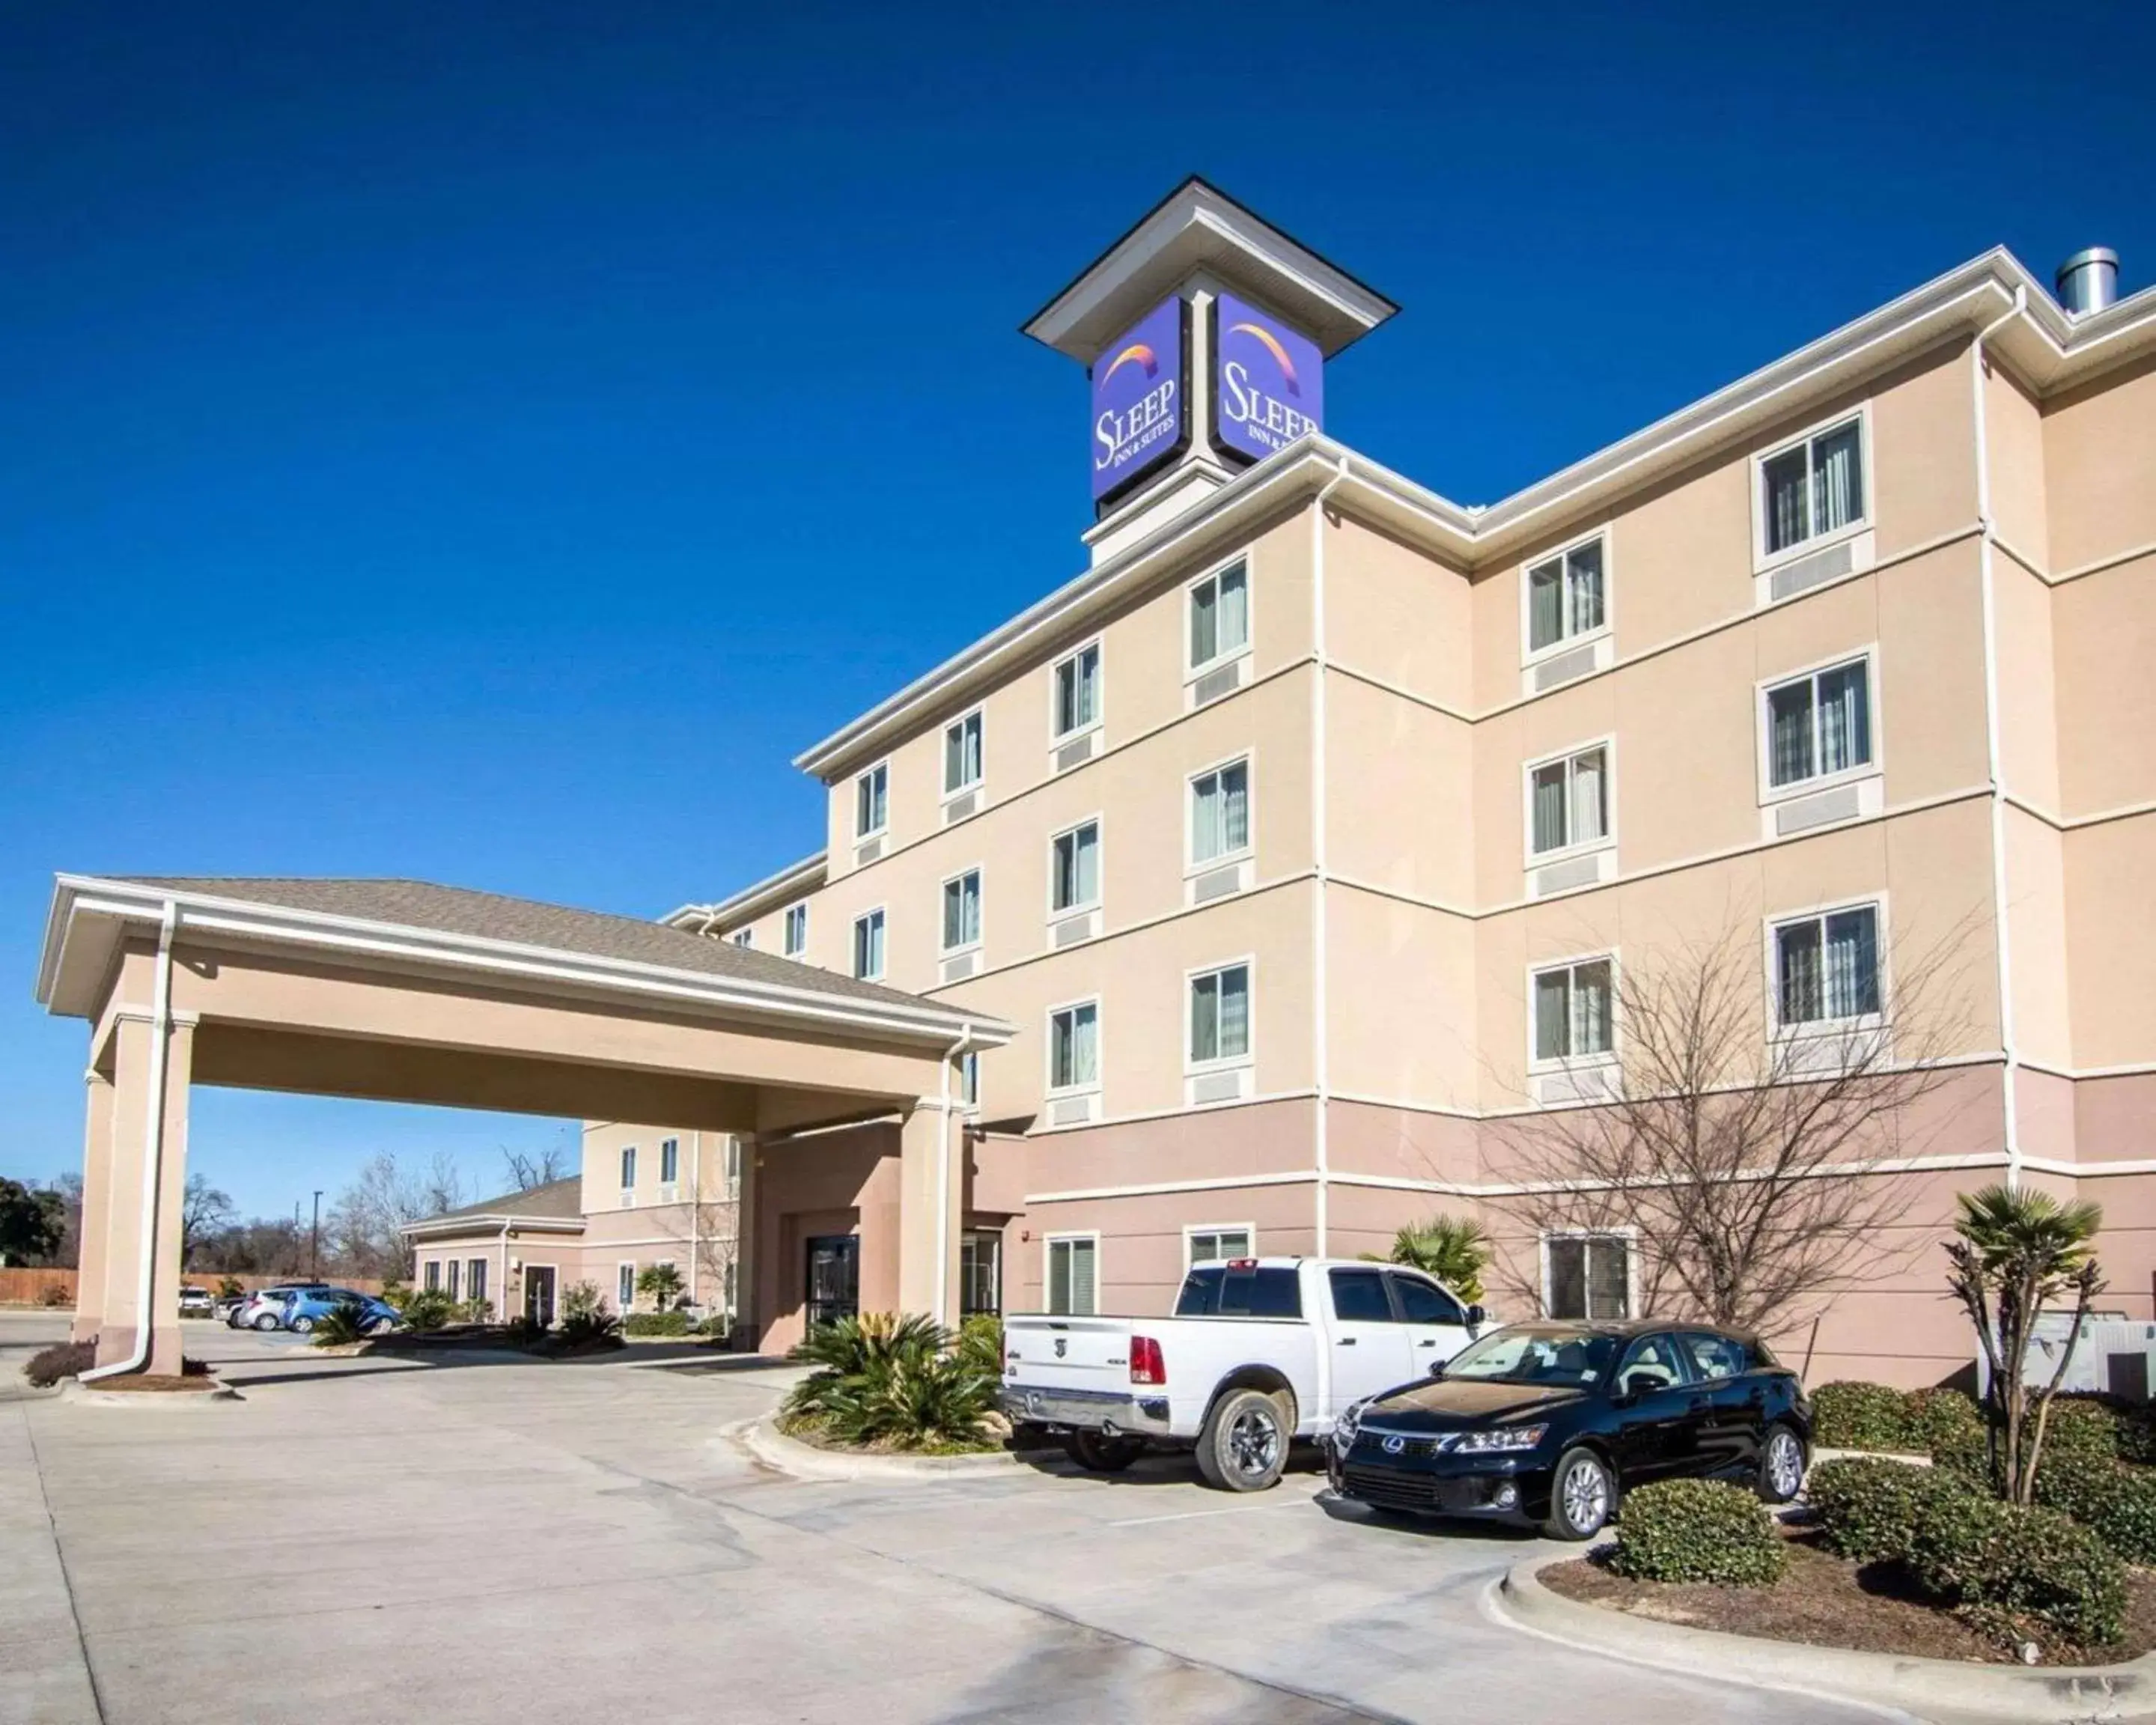 Property Building in Sleep Inn and Suites near Mall & Medical Center